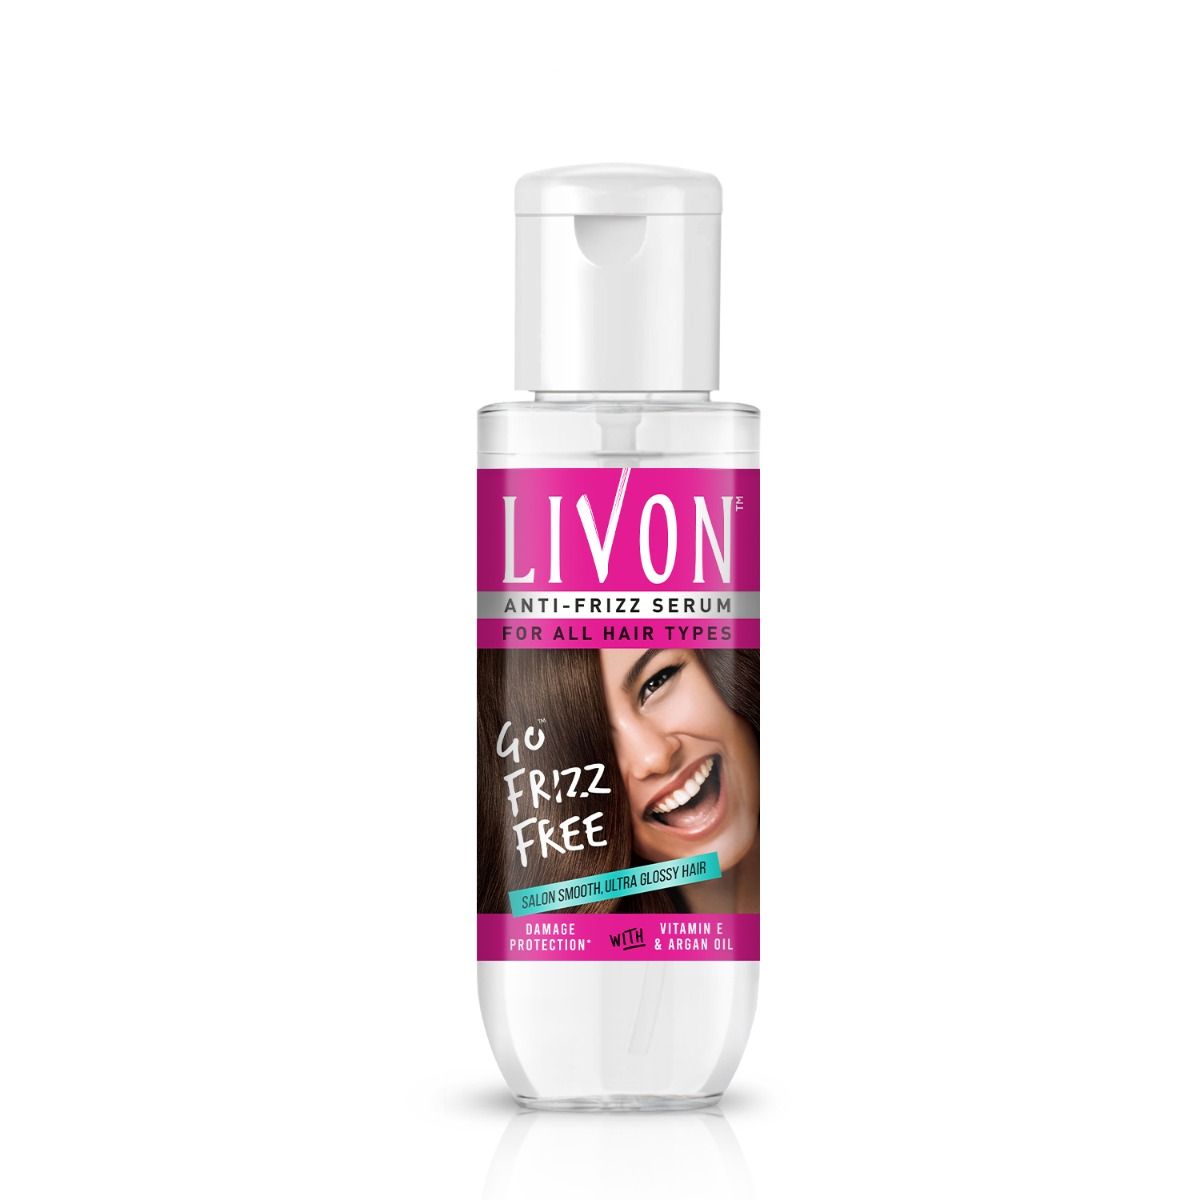 Buy Livon Hair Serum For Women  All Hair Types  Smooth FrizzFree   Glossy Hair  With Argan Oil  Vitamin E  100 Ml Pack Of 2 Online at Low